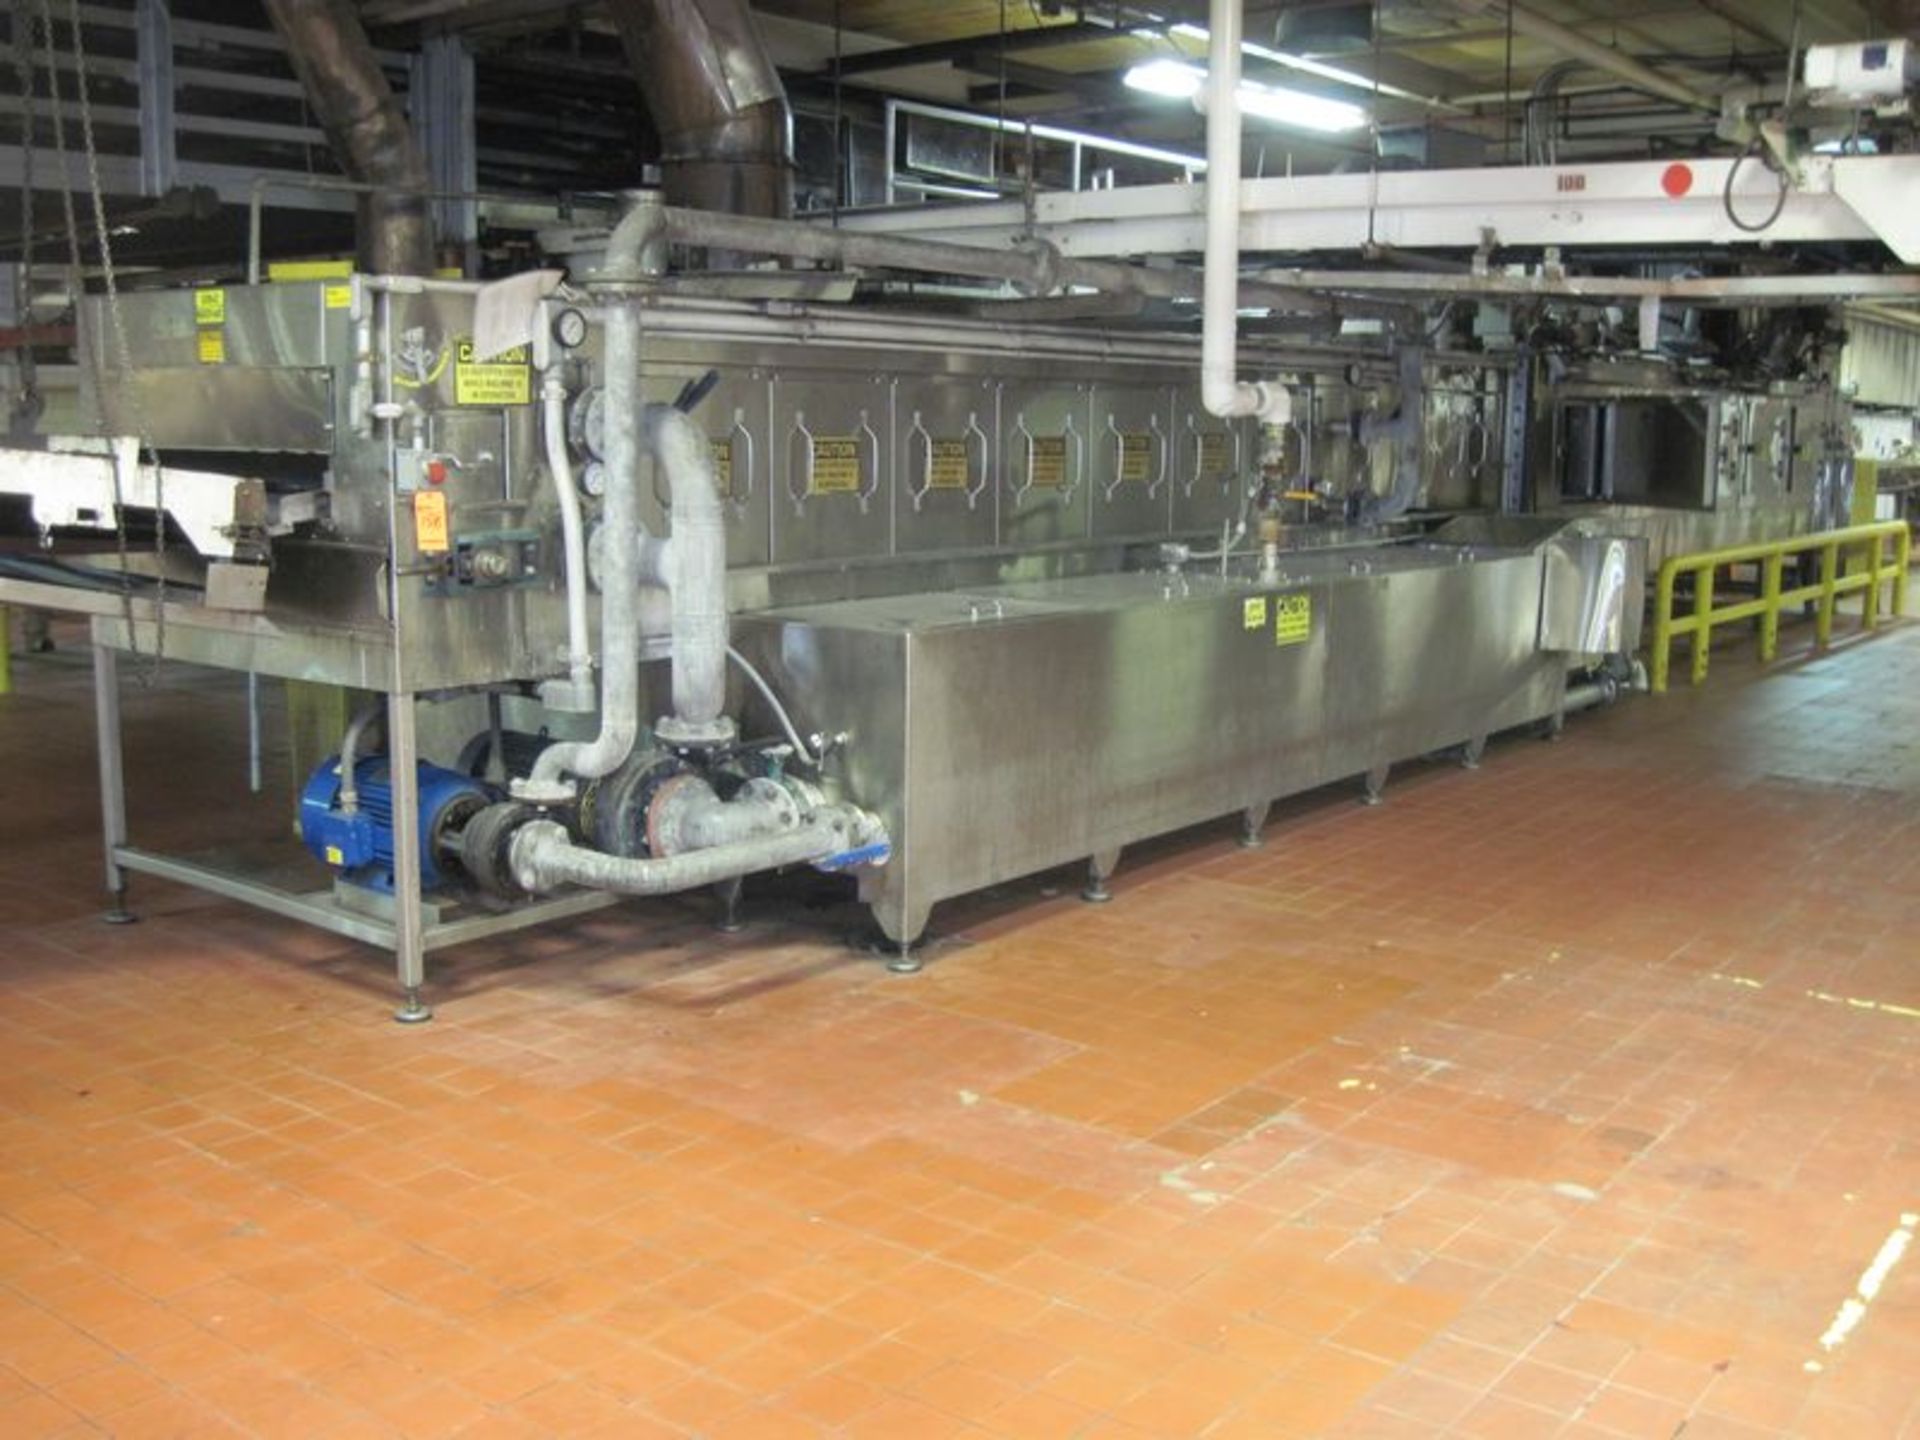 Alvey conveyorized pan washer. Approximate 44" wide x 48' long galvanized mesh belt. Stainless steel